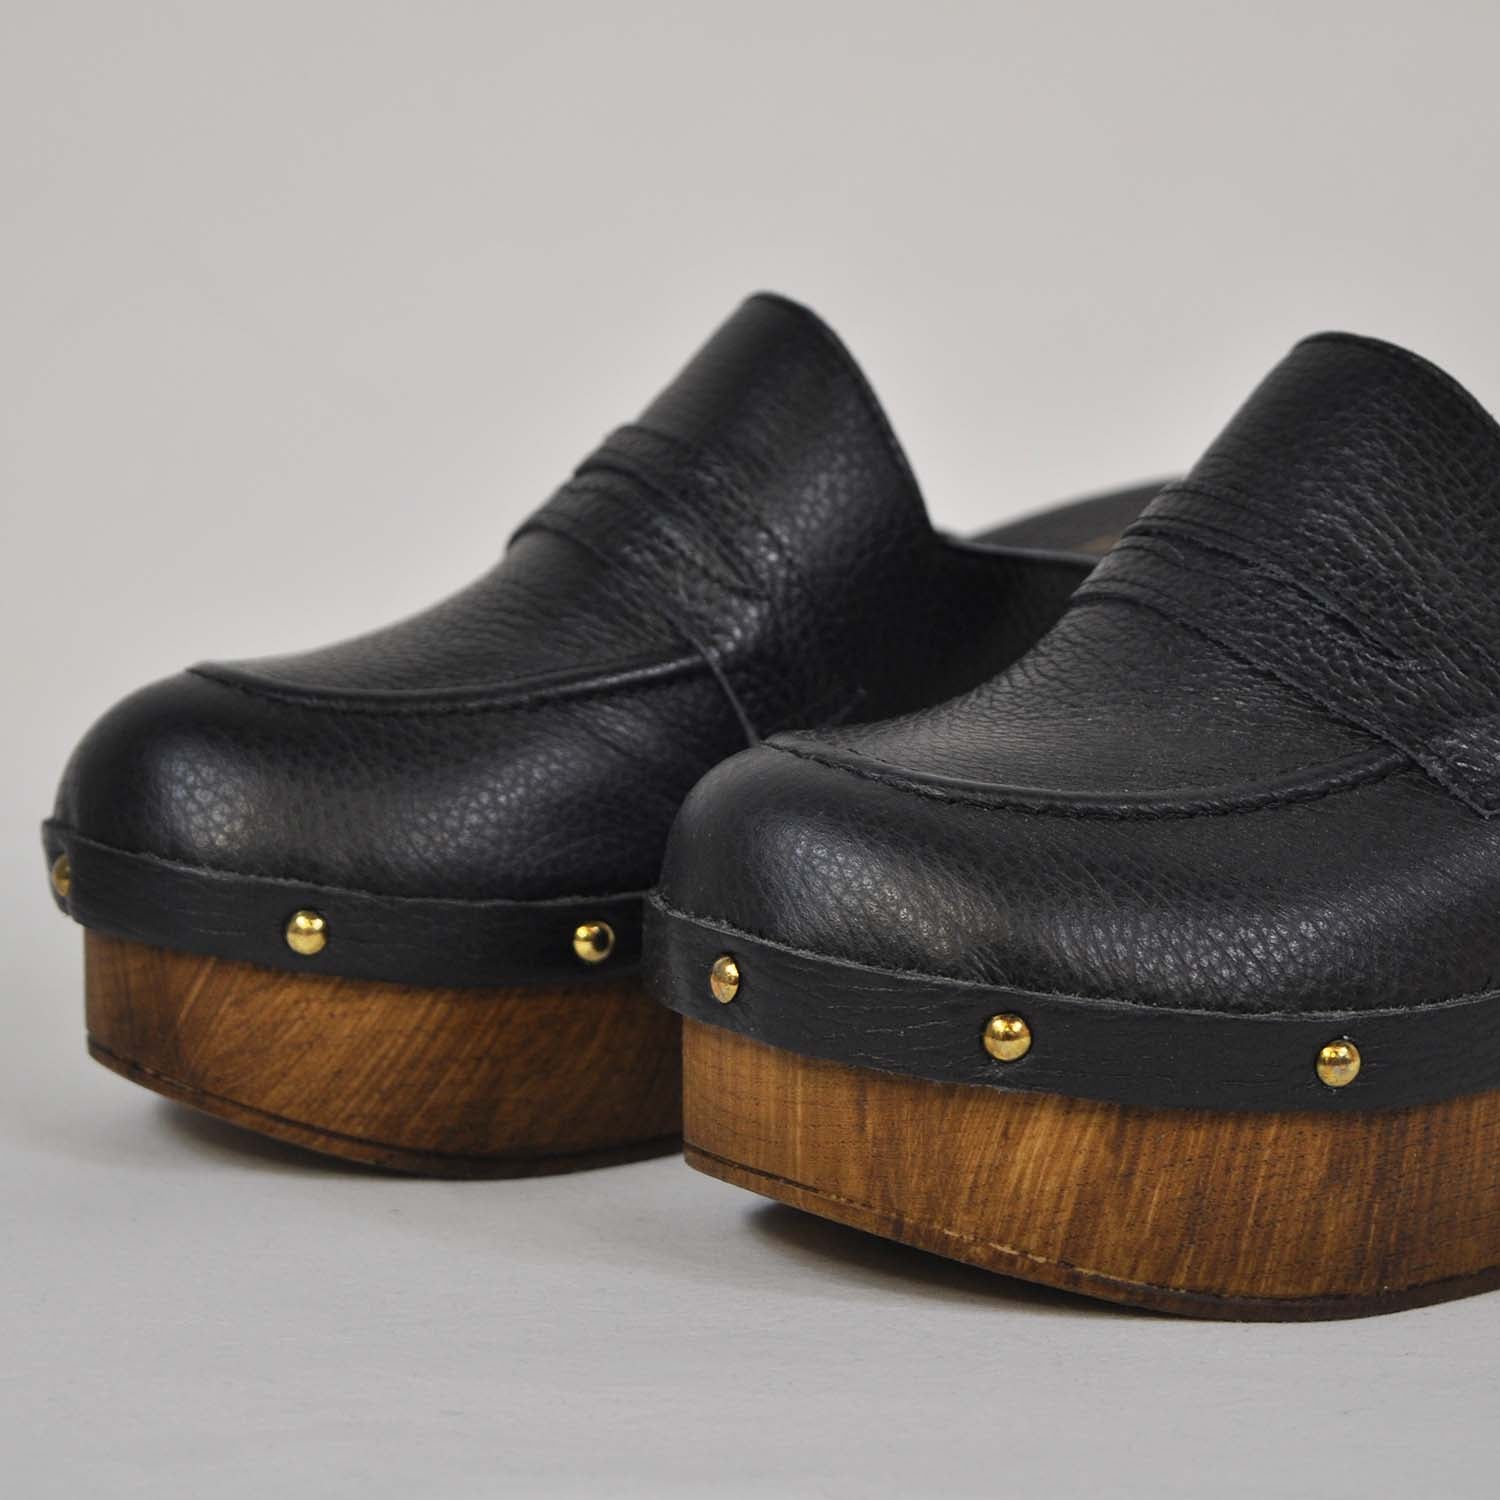 Black leather loafers clogs